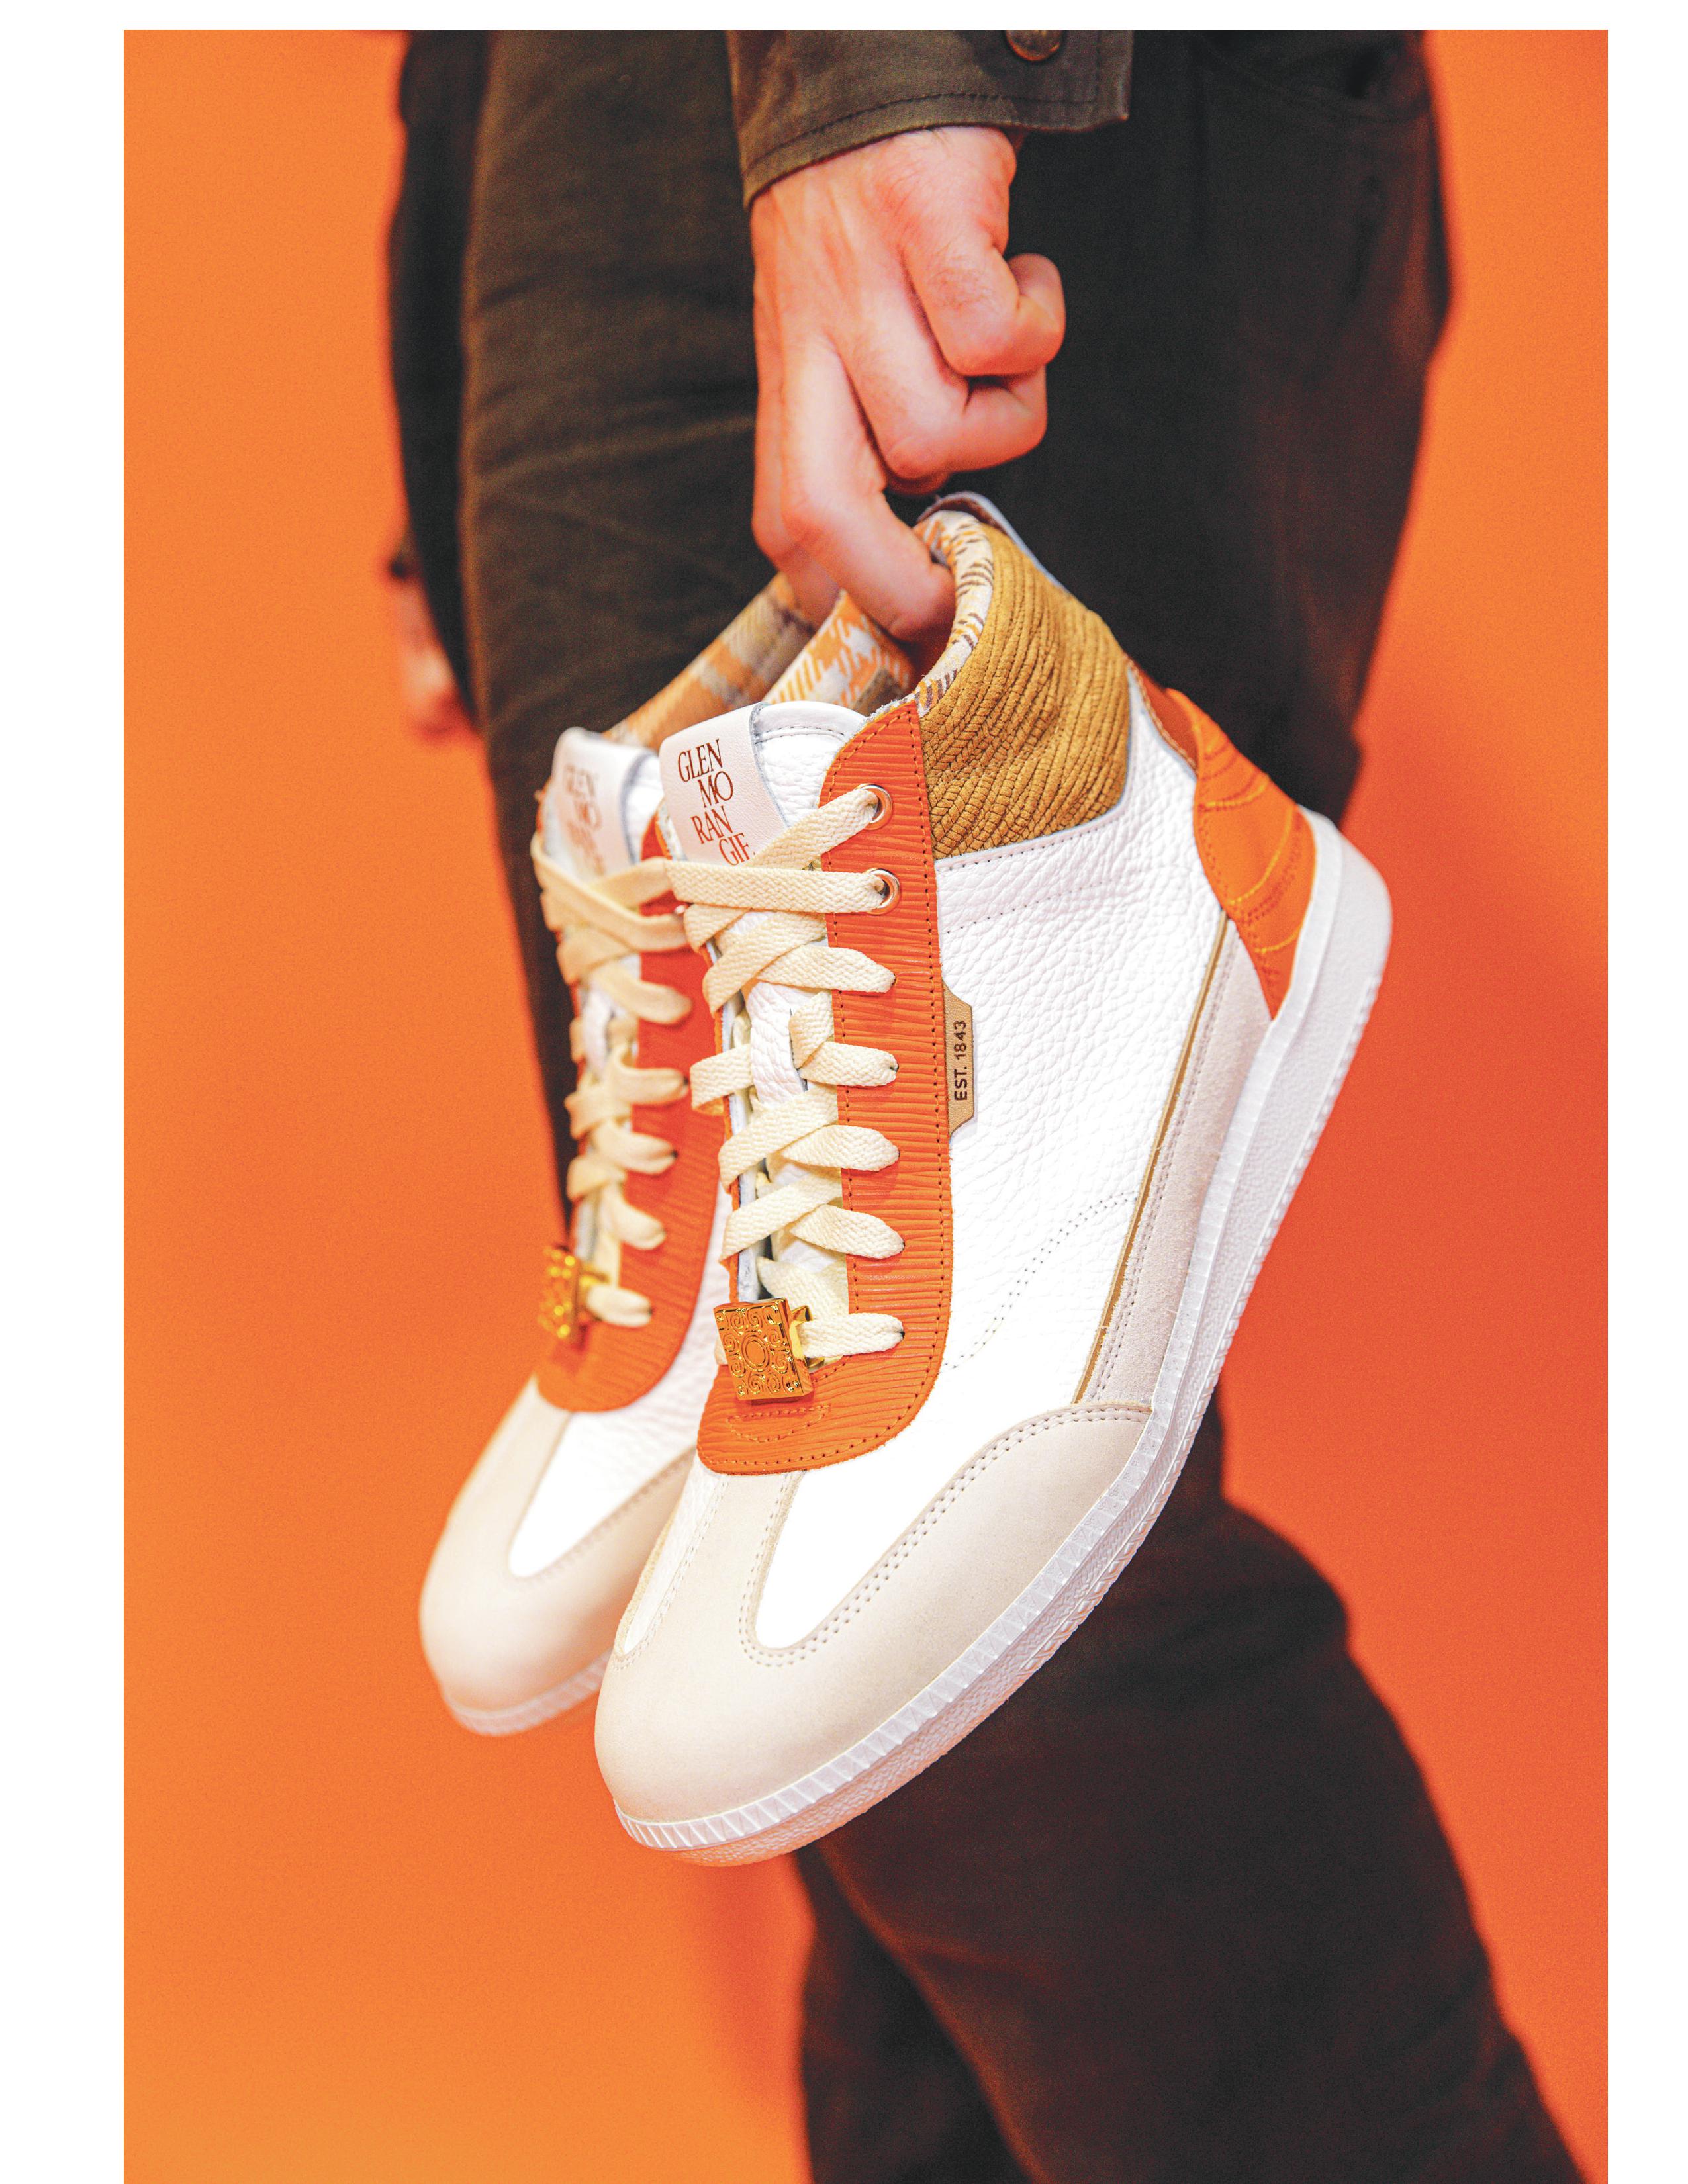 the-shoe-surgeon-glenmorangie-are-giving-away-these-ultra-exclusive-sneakers-maxim